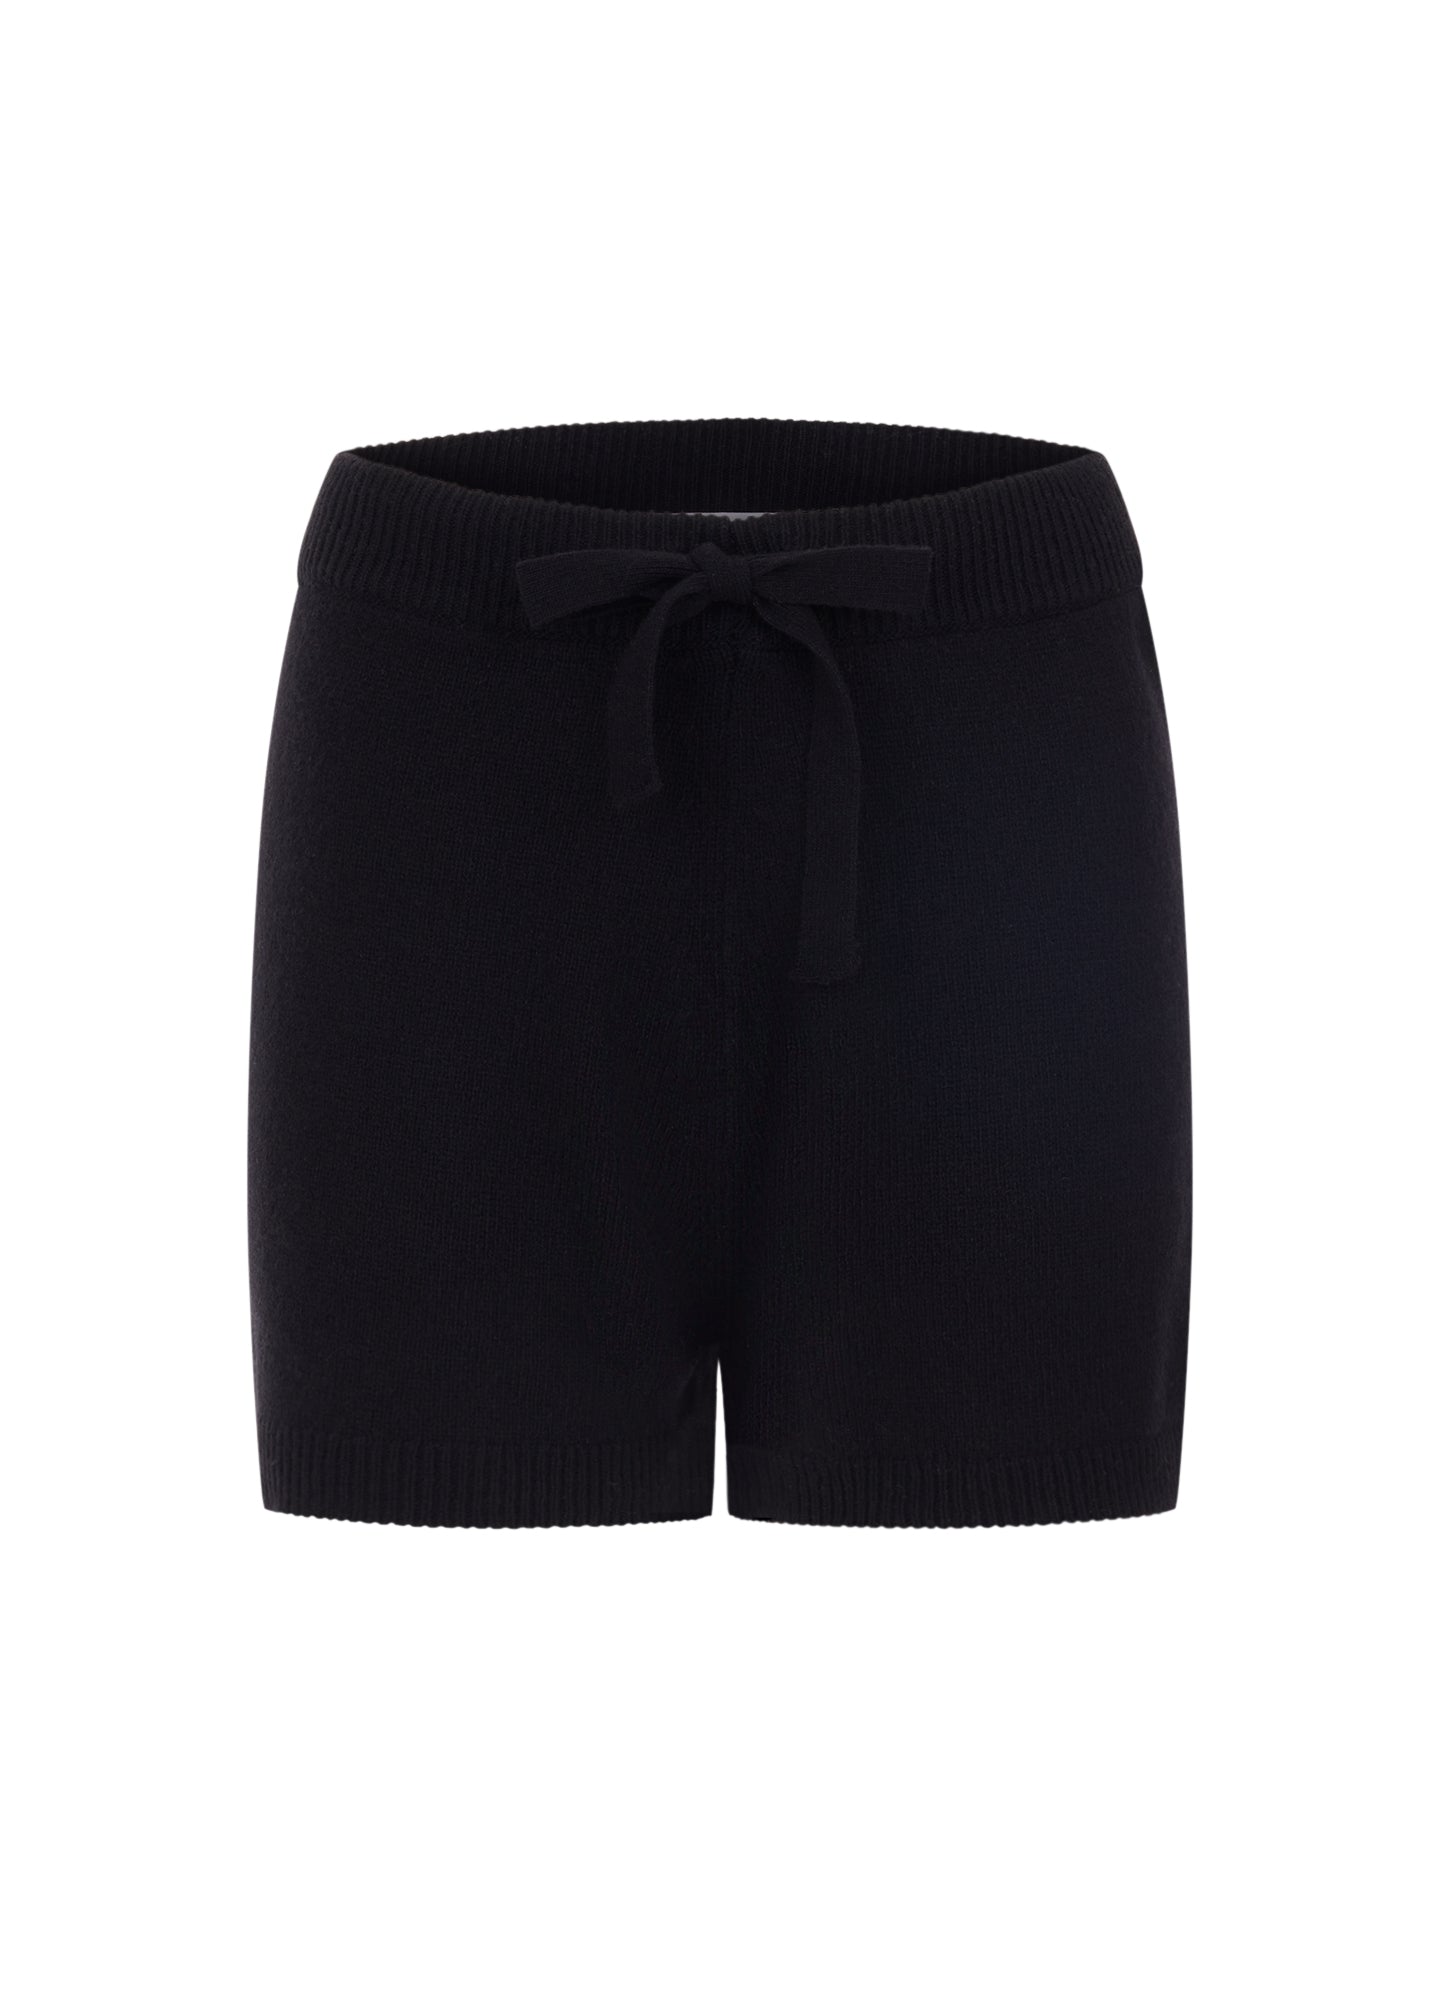 Women's cashmere knitted shorts in Black 